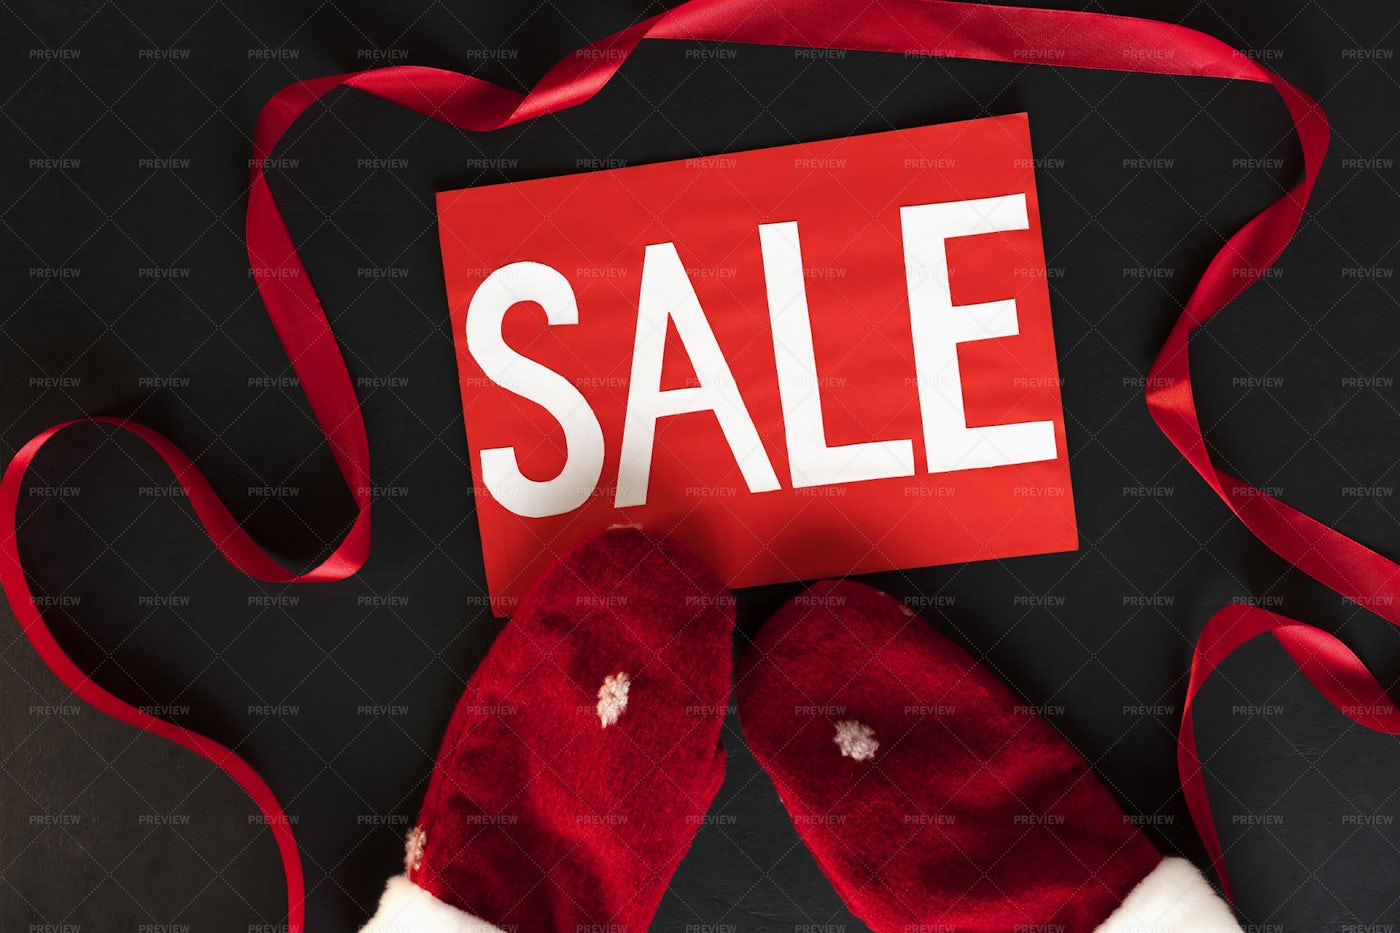 Red Mittens And Sale Sign: Stock Photos